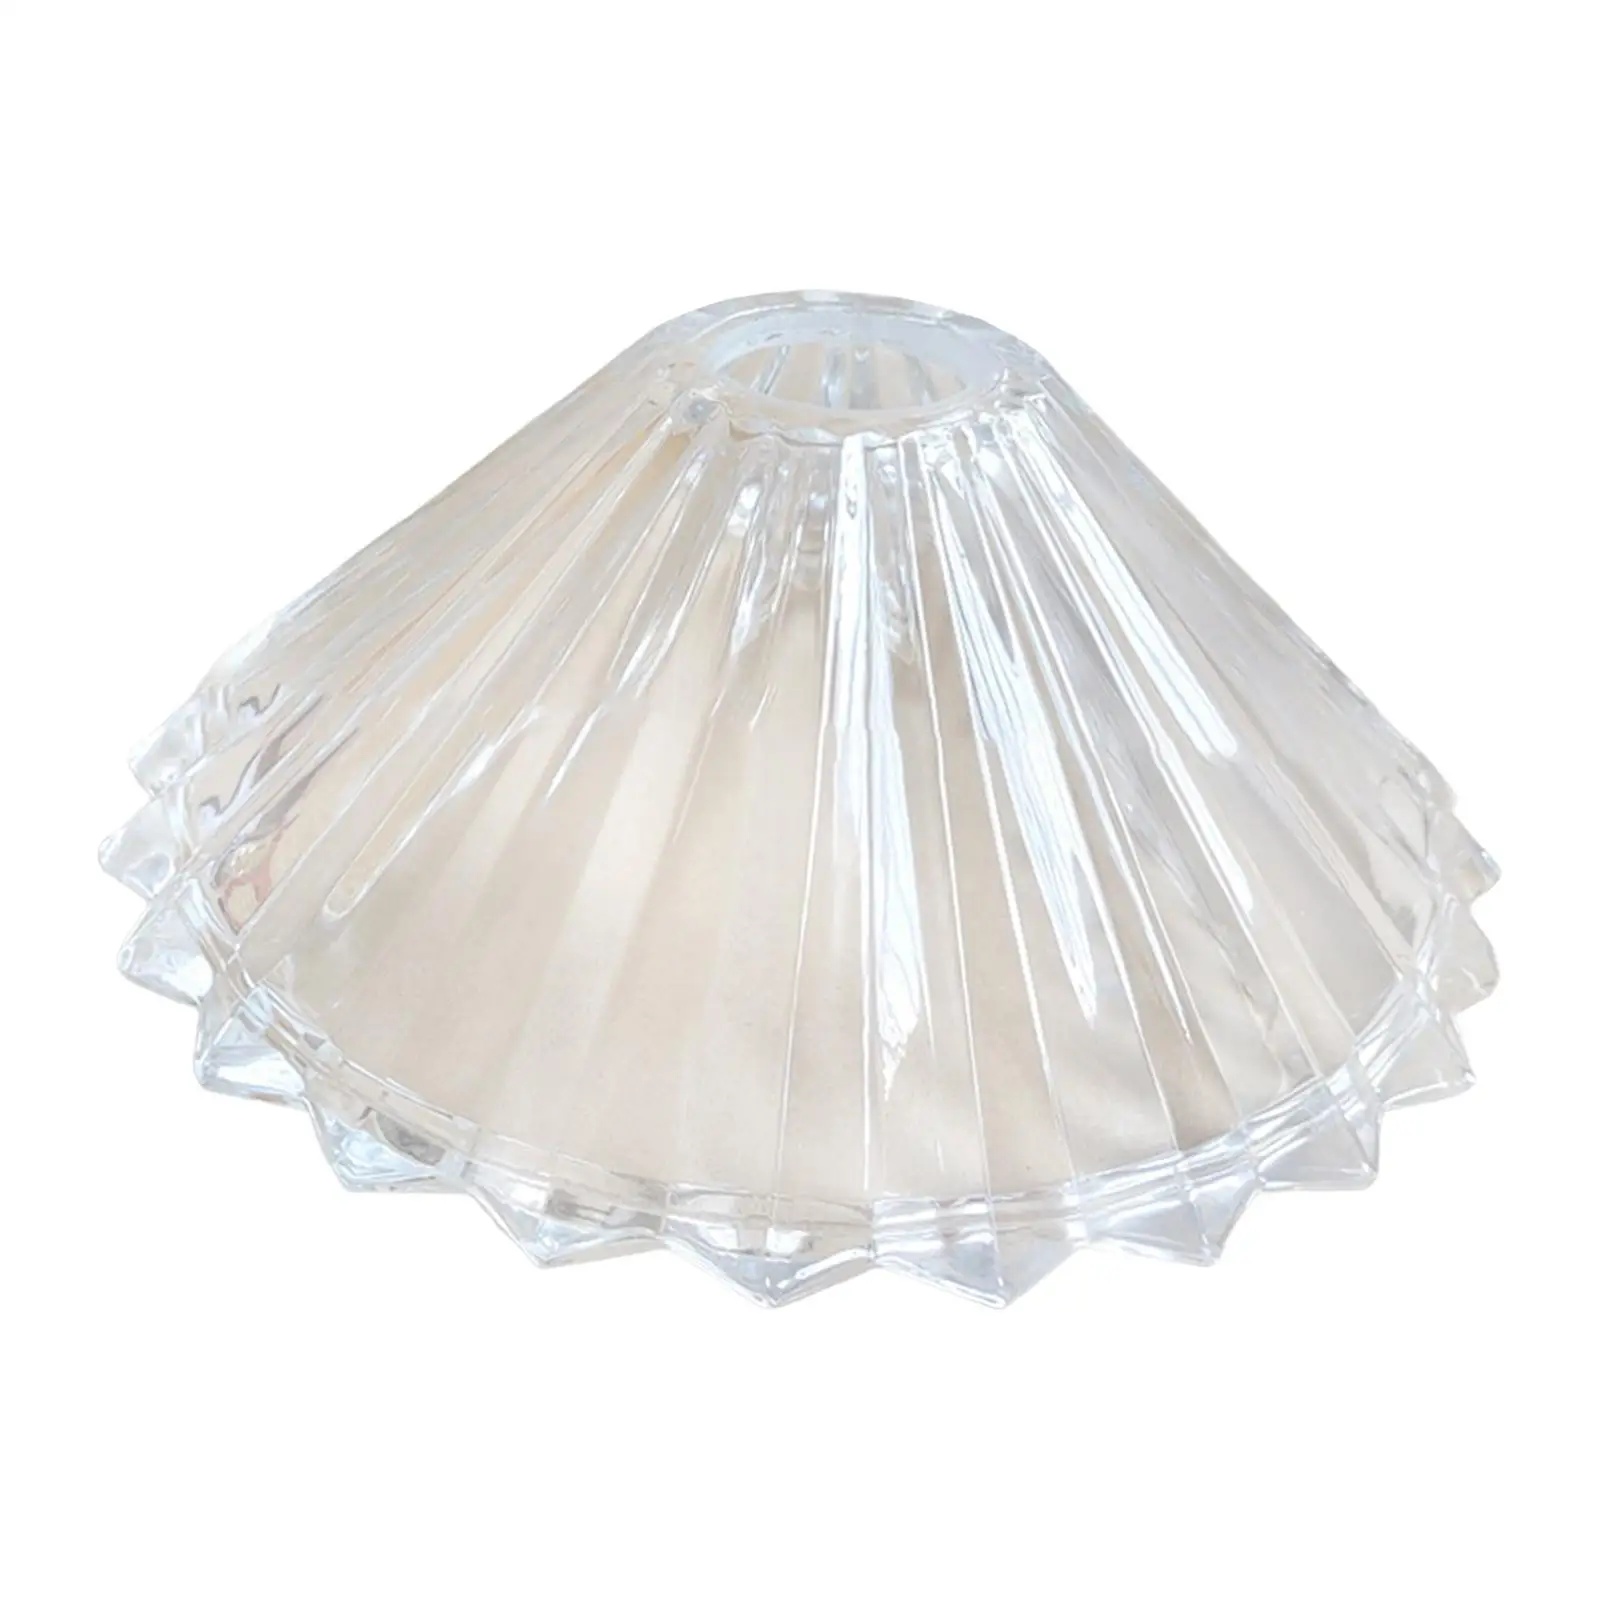 Simple Crystal Lamp Shade Cover Replacement Durable Transparent Ceiling Glass Shade for Wedding Office Hallway Party Ornament